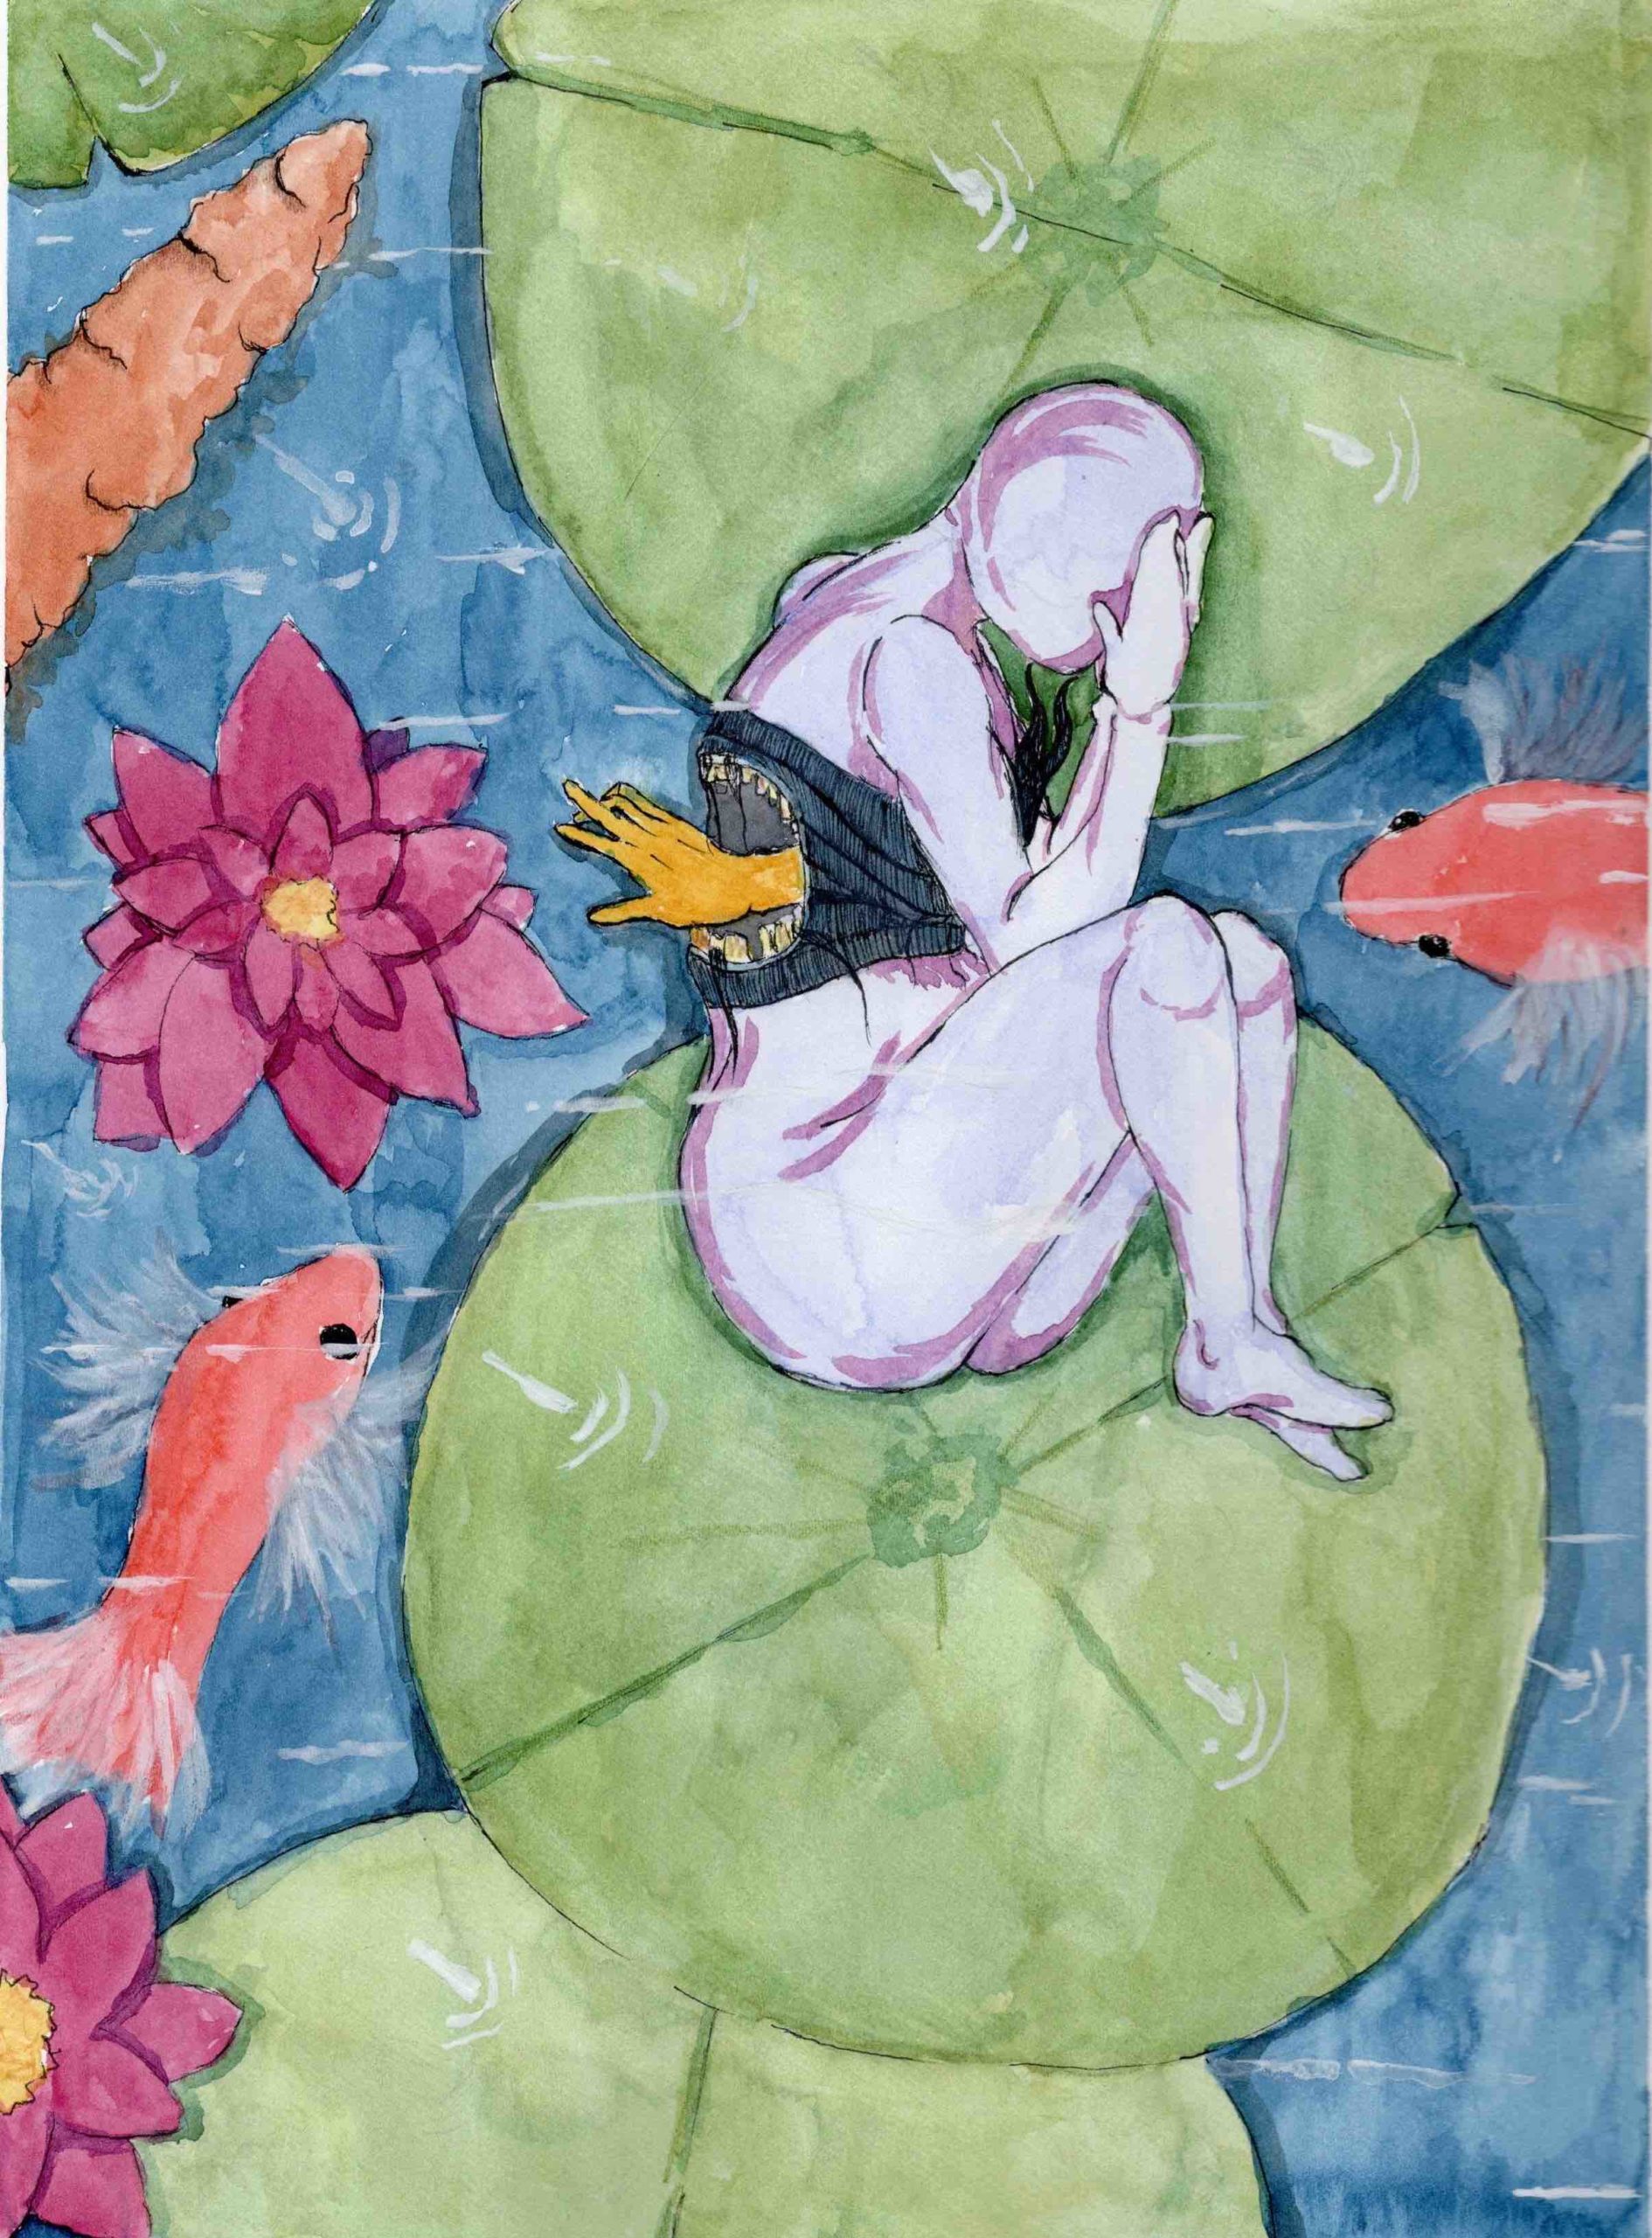 This is a pen drawing colourized with watercolour and guache. We see a close-up from above of a koi pond, with large flat green lilypads and rosey waterlily flowers. Two curious orange fish curiously approach the centre figure, small and white, who is curled in fetal position atop the lily pads, hands covering face. From a gaping round mouth with ragged yellow teeth in the figure’s back, a delicate yellow hand reaches out to explore the environment through touch.